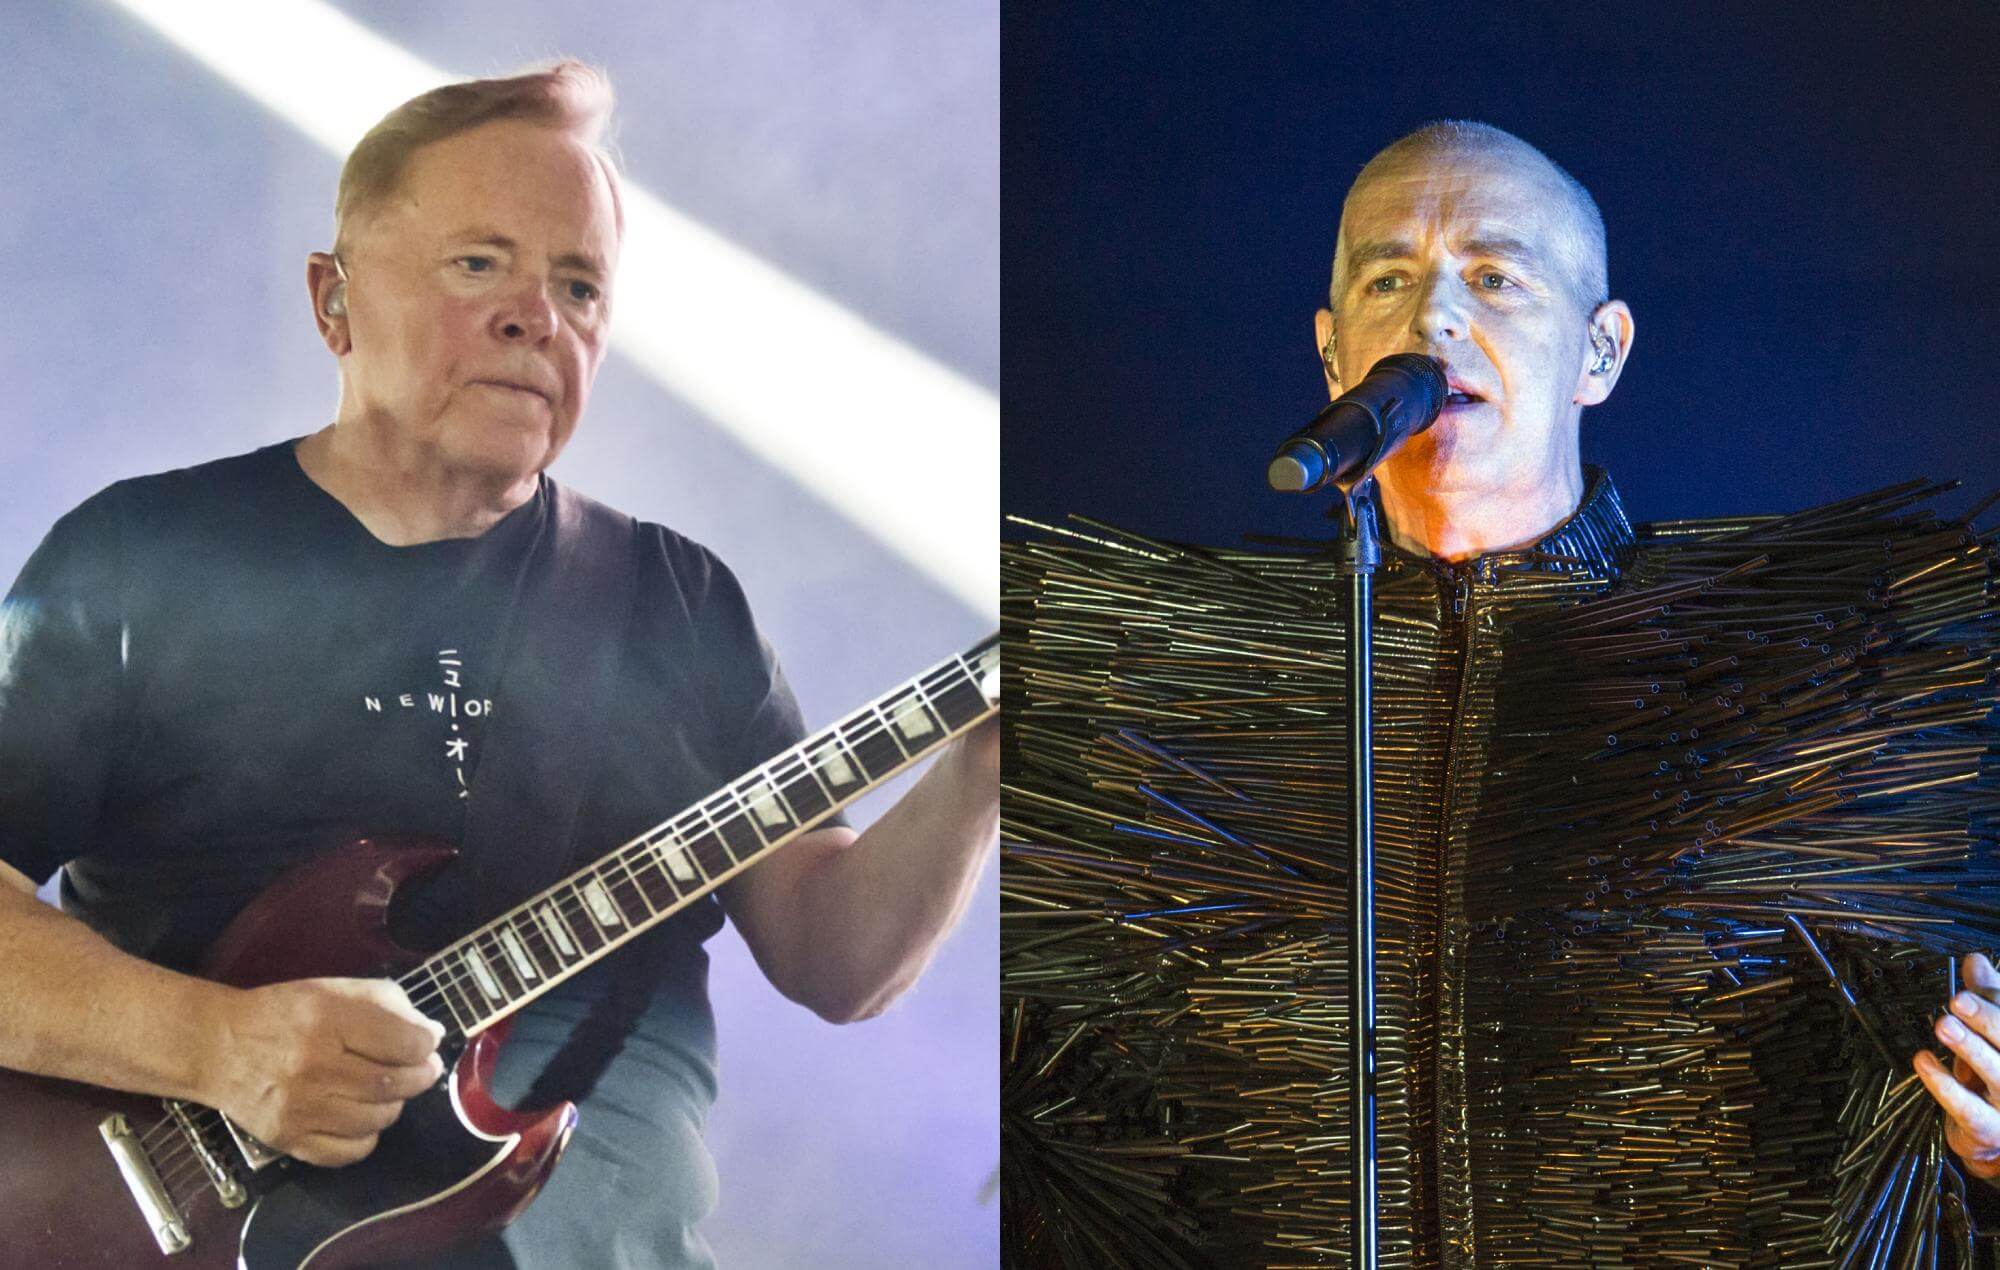 New Order and Pet Shop Boys move North American 'Unity Tour' to 2022 ...